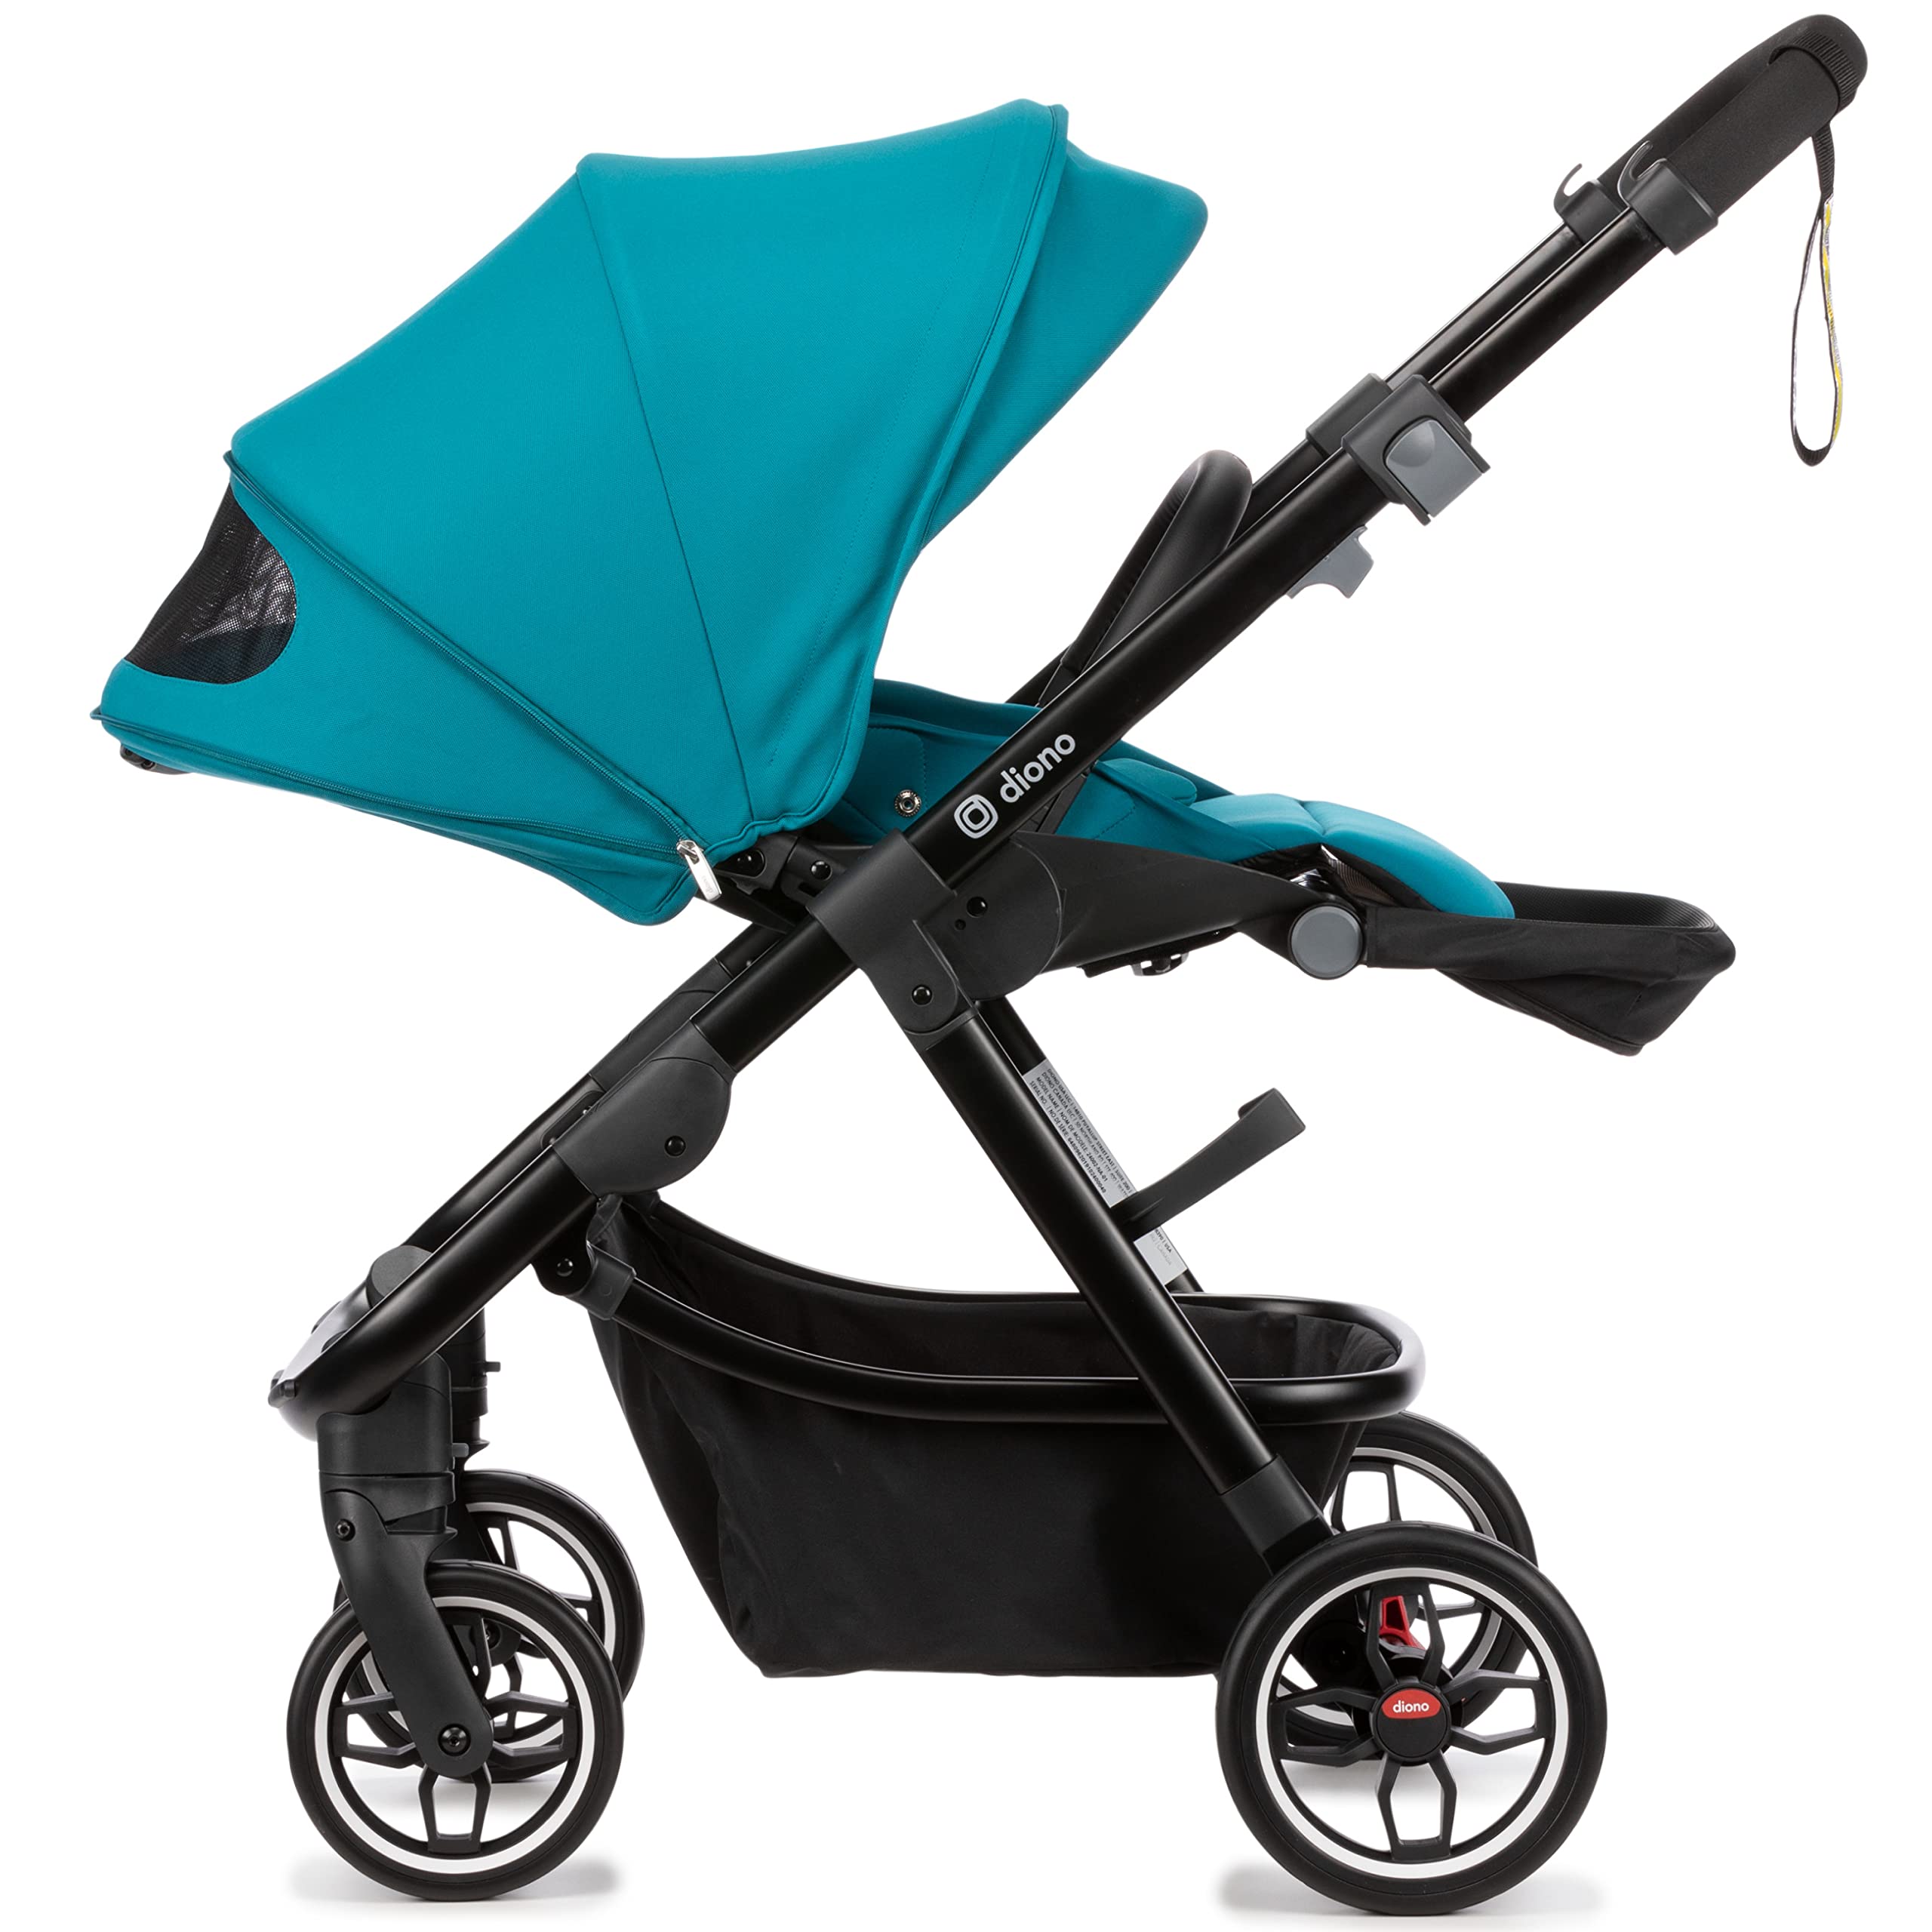 Diono Excurze Baby, Infant, Toddler Stroller, Perfect City Travel System Stroller and Car Seat Compatible, Adaptors Included Compact Fold, Narrow Ride, XL Storage Basket, Blue Turquoise